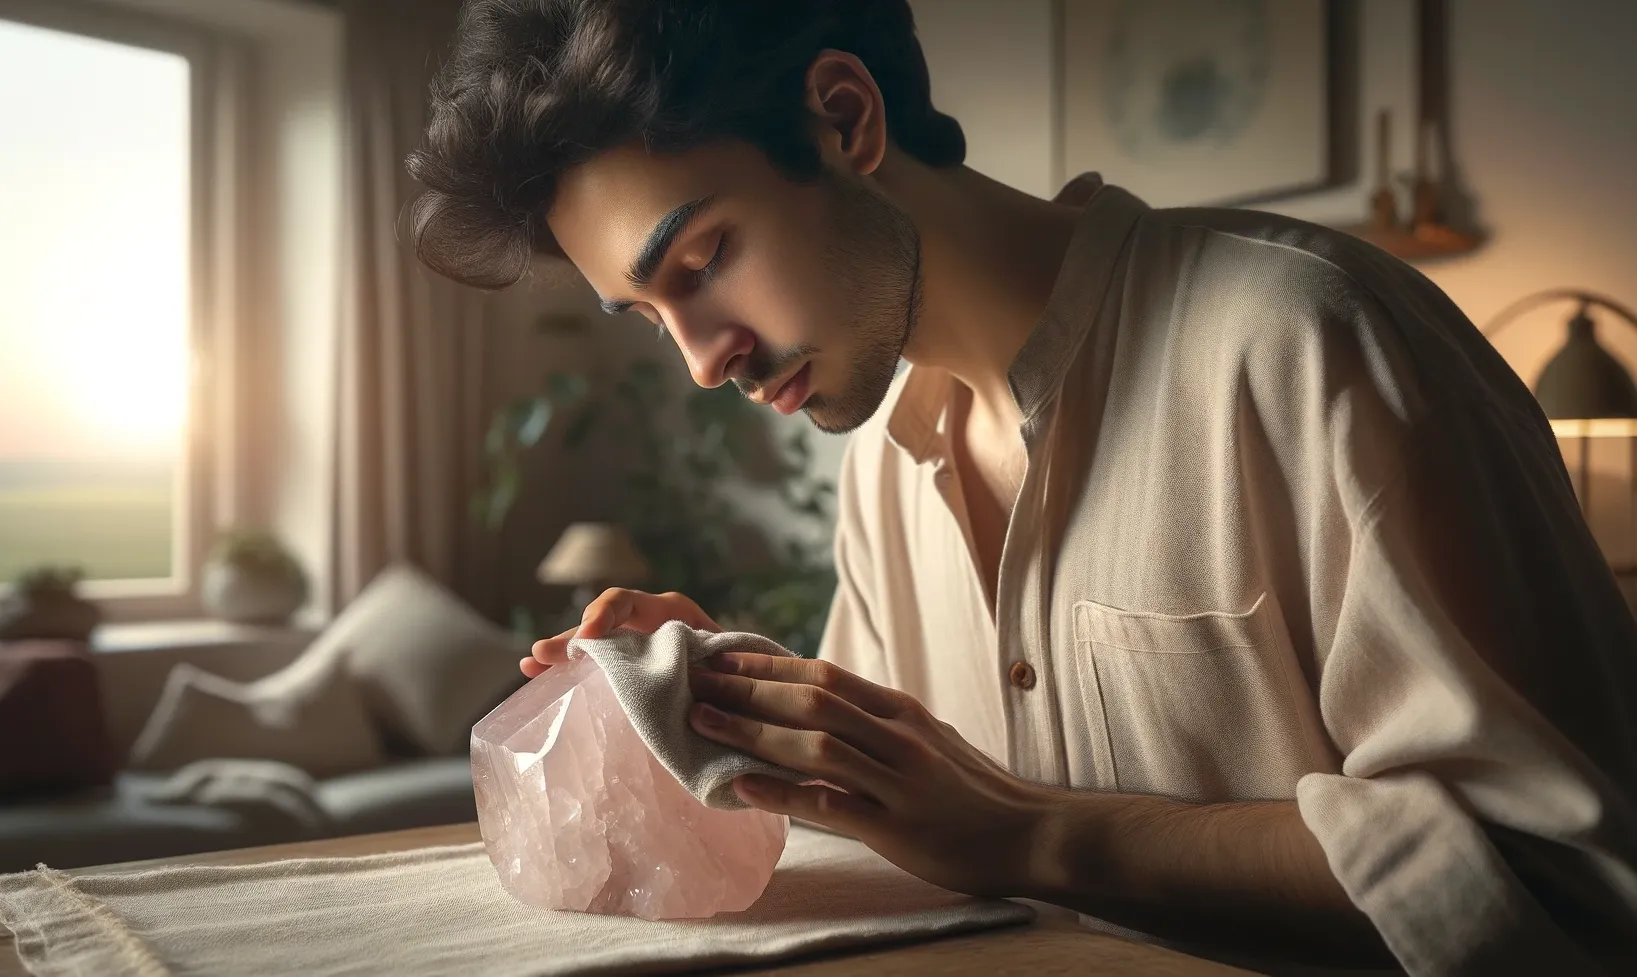 photo of a man cleaning rose quartz crystal with a damp cloth